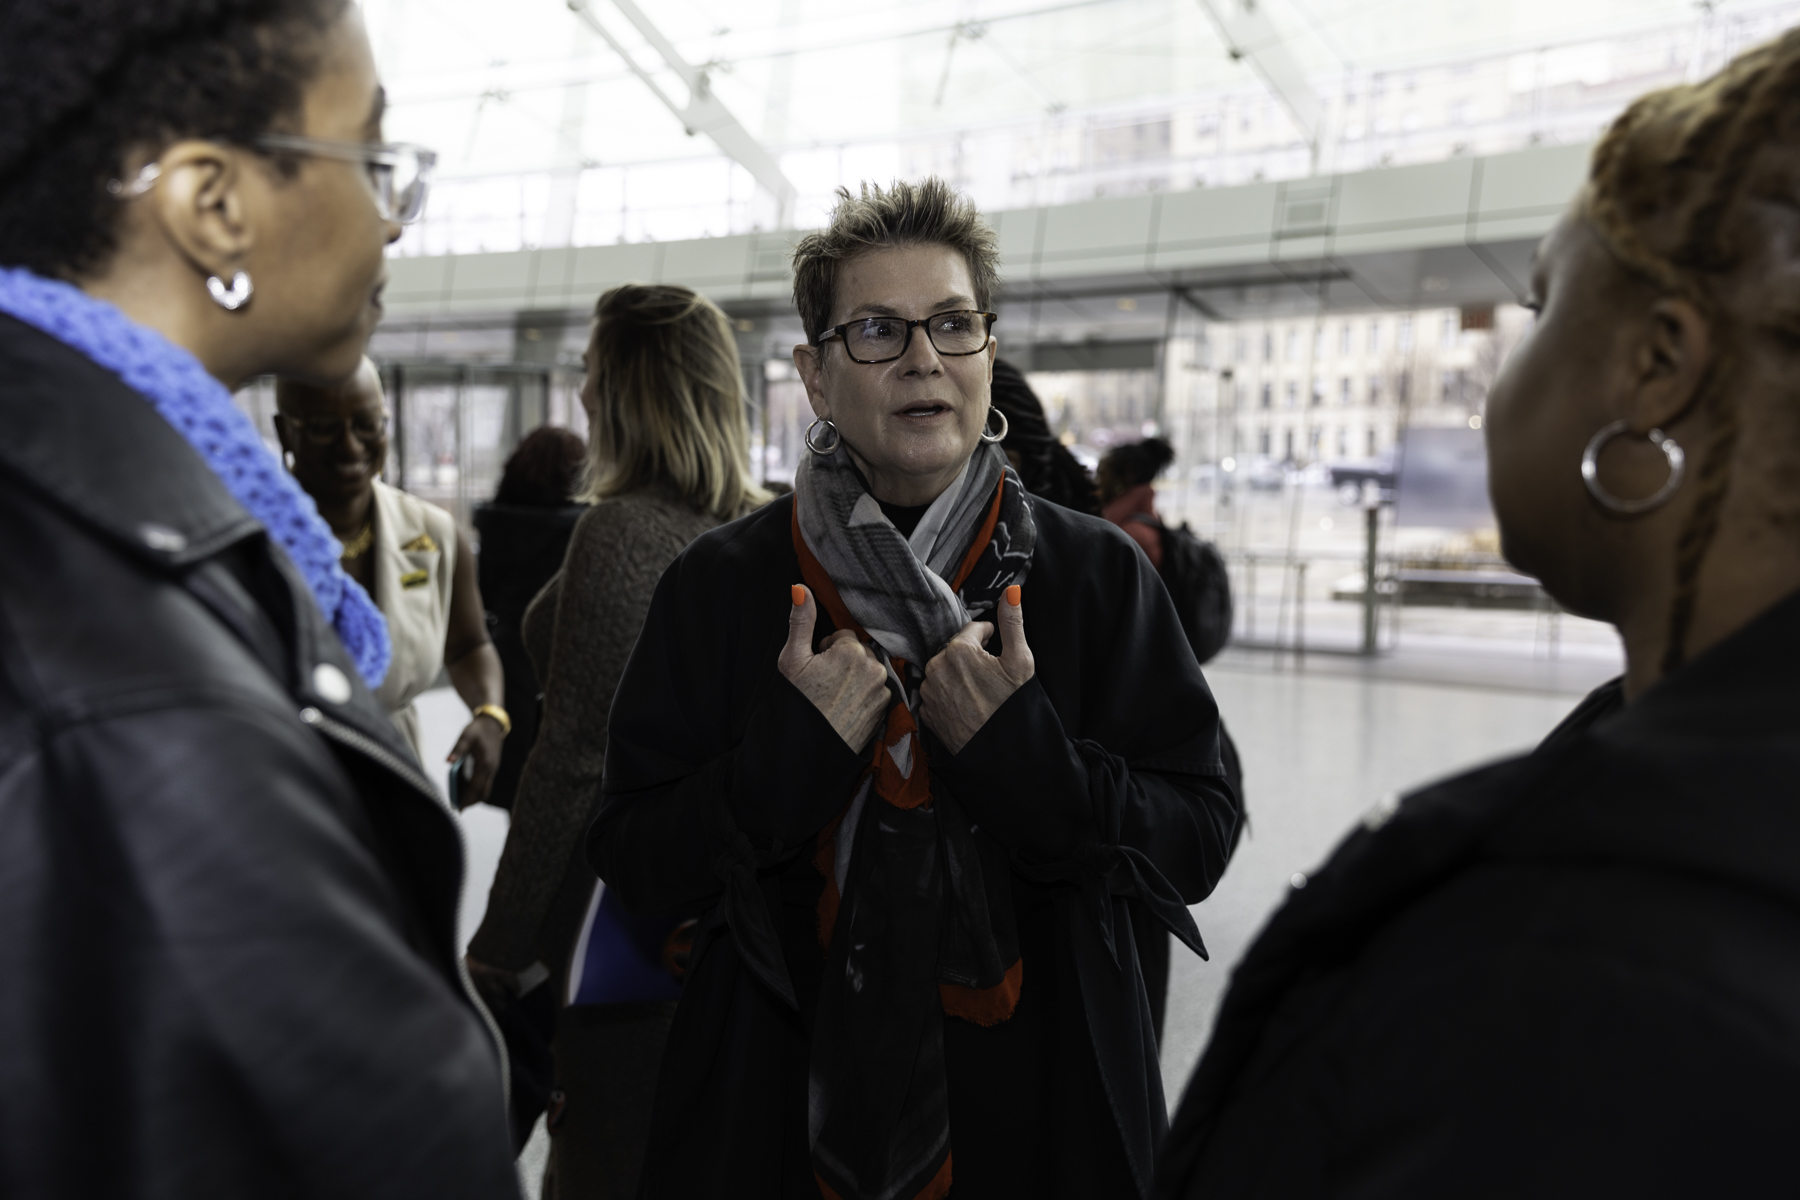 A woman gesturing during a conversation with two others in an indoor public space.